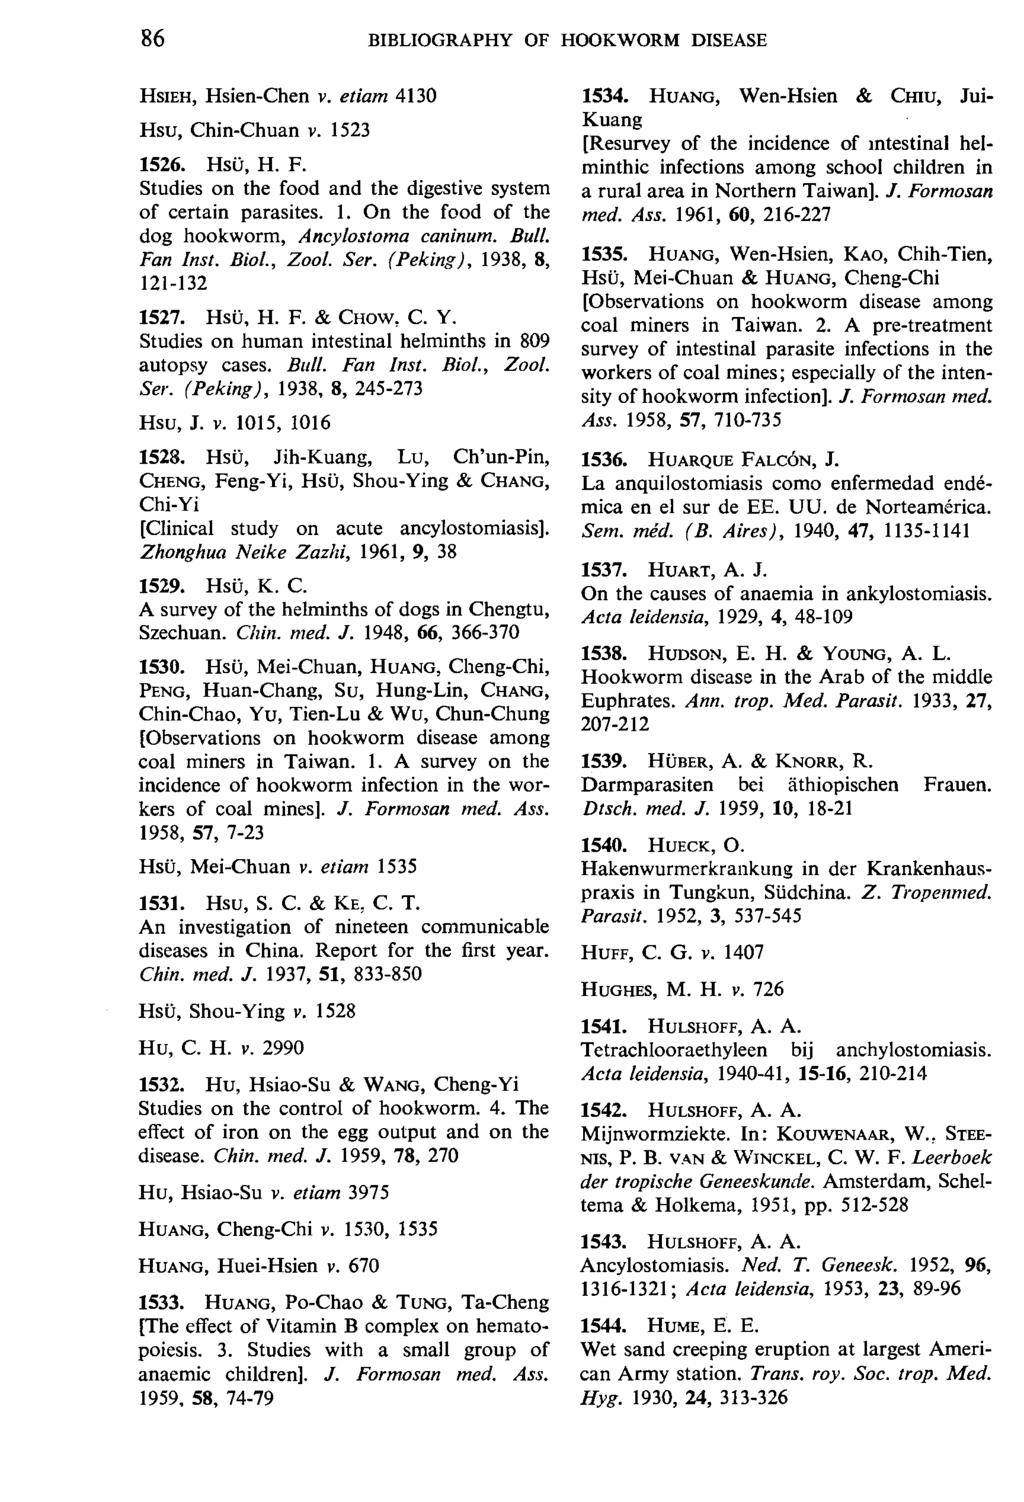 86 BIBLIOGRAPHY OF HOOKWORM DISEASE HsiEH, Hsien-Chen v. etiam 4130 Hsu, Chin-Chuan v. 1523 1526. HsO, H. F. Studies on the food and the digestive system of certain parasites. 1. On the food of the dog hookworm, Ancylostoma caninum.